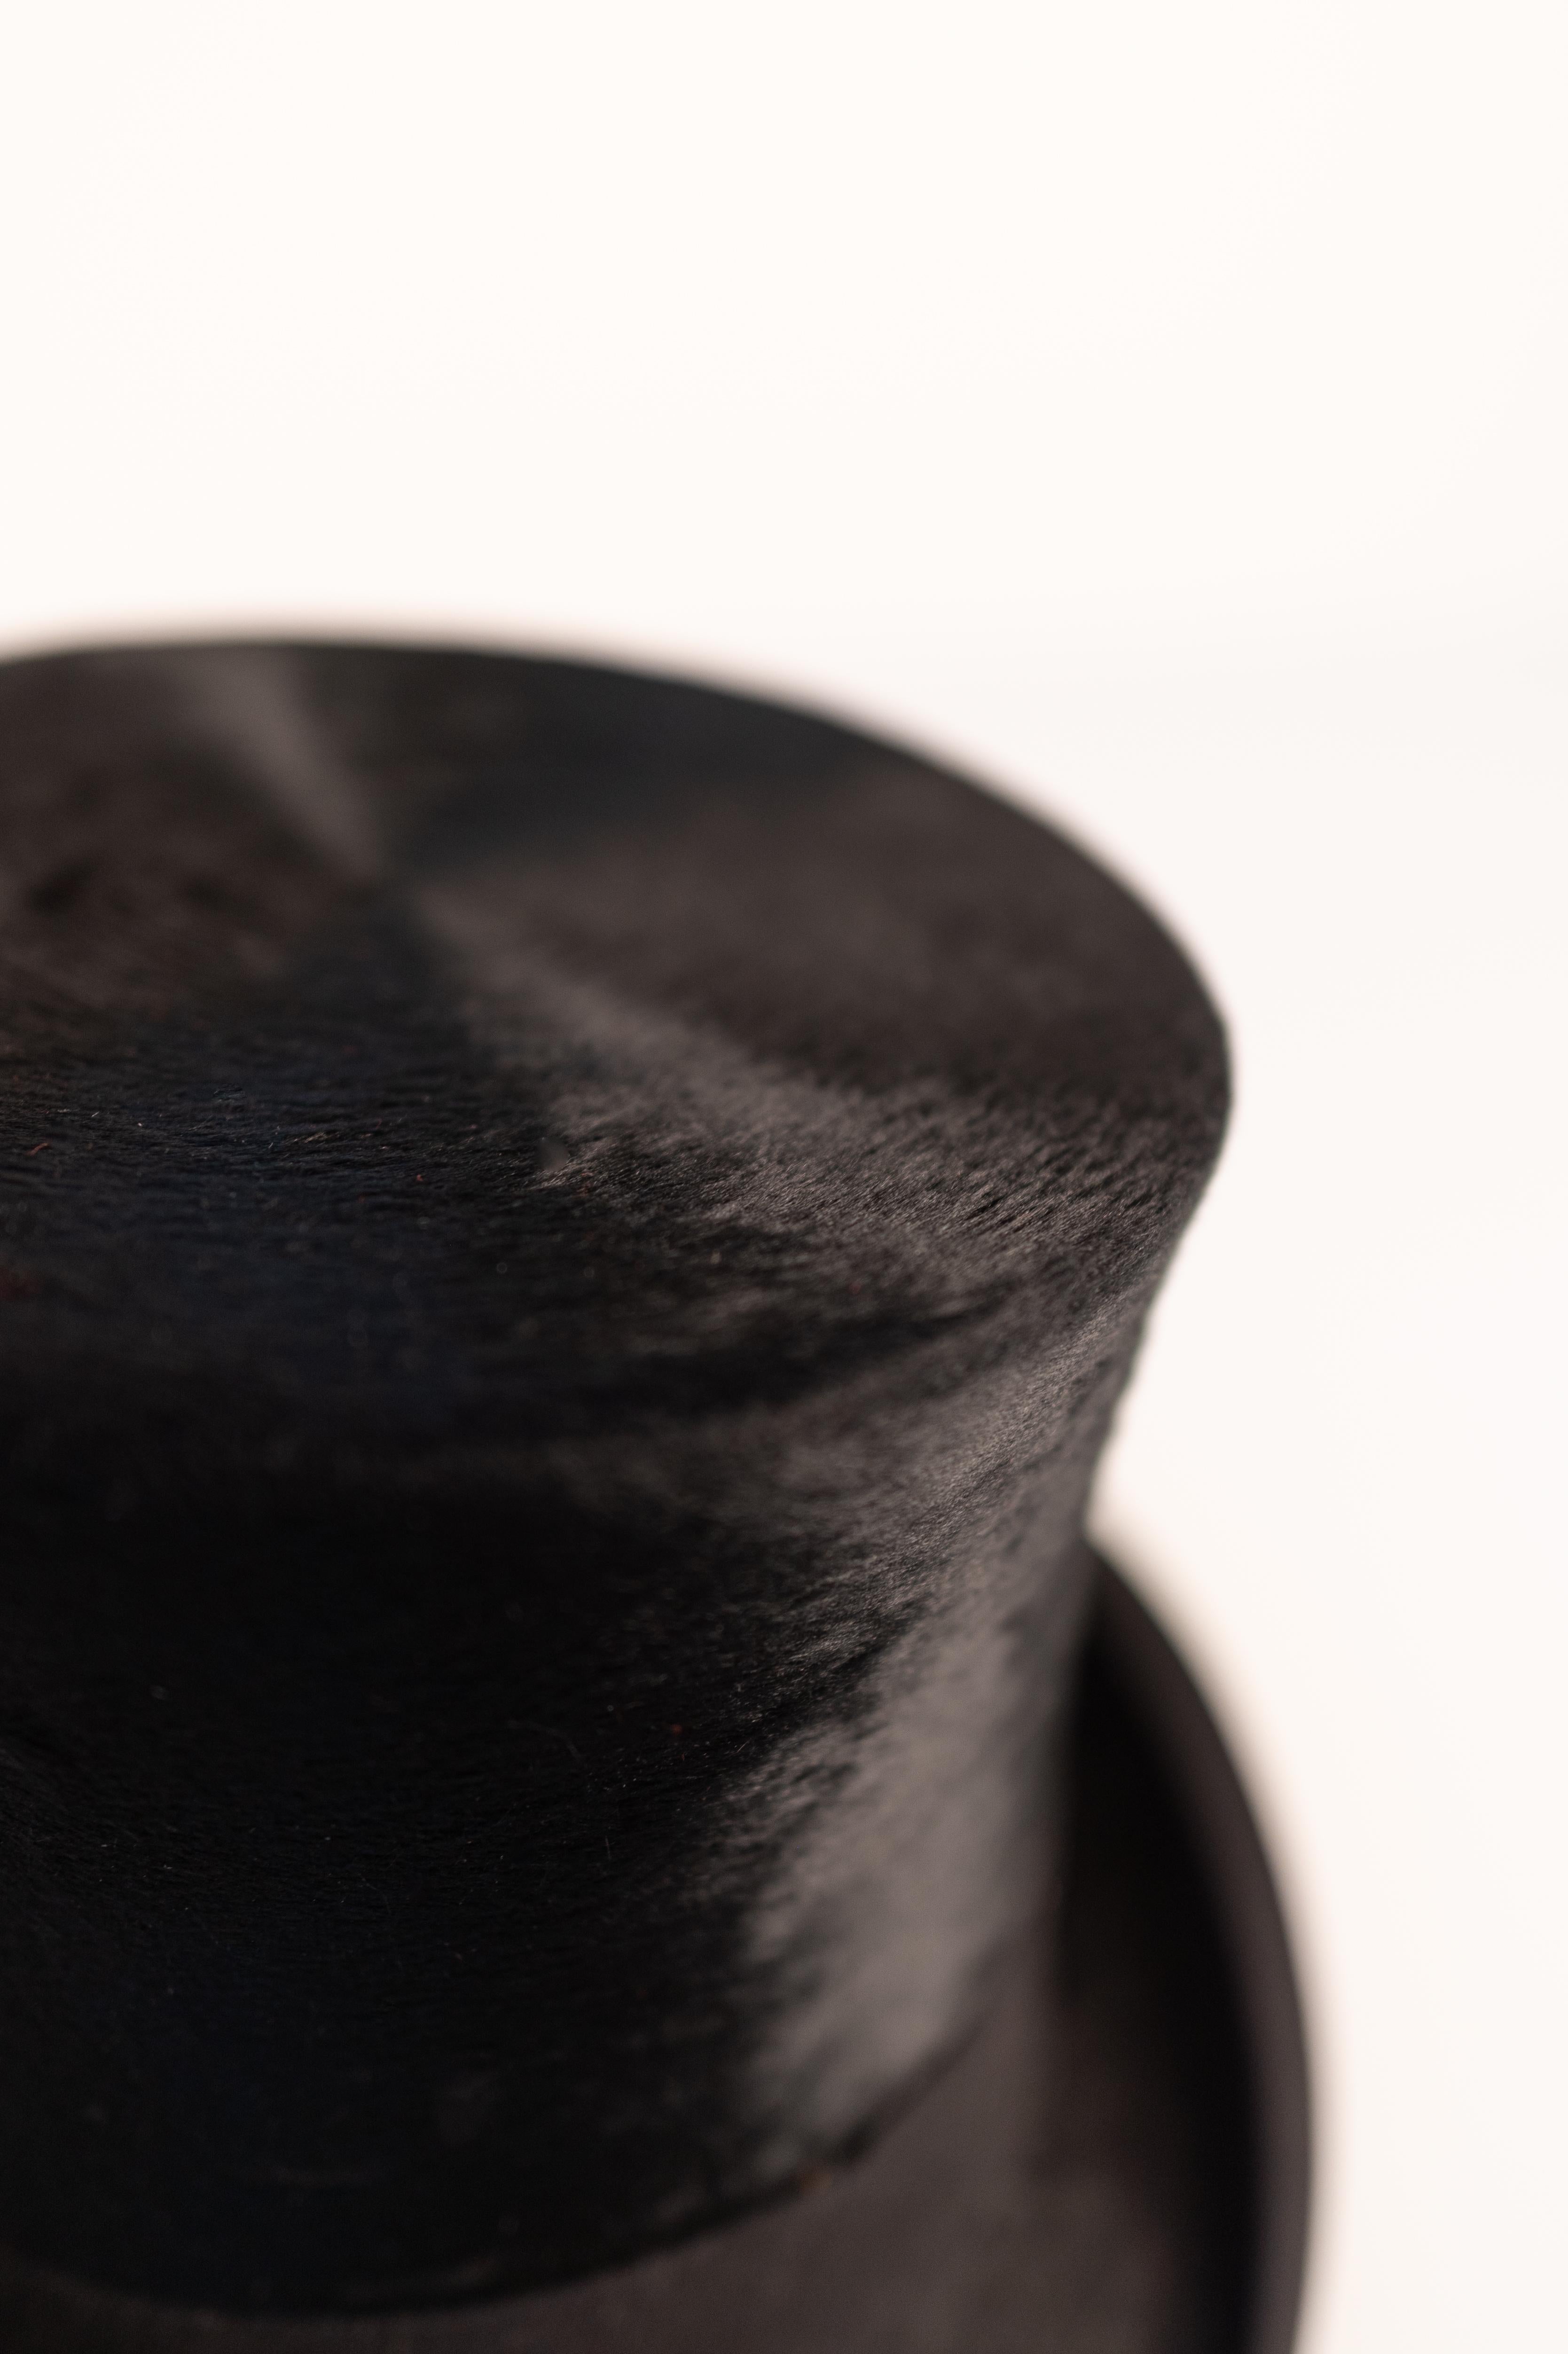 second hand top hat